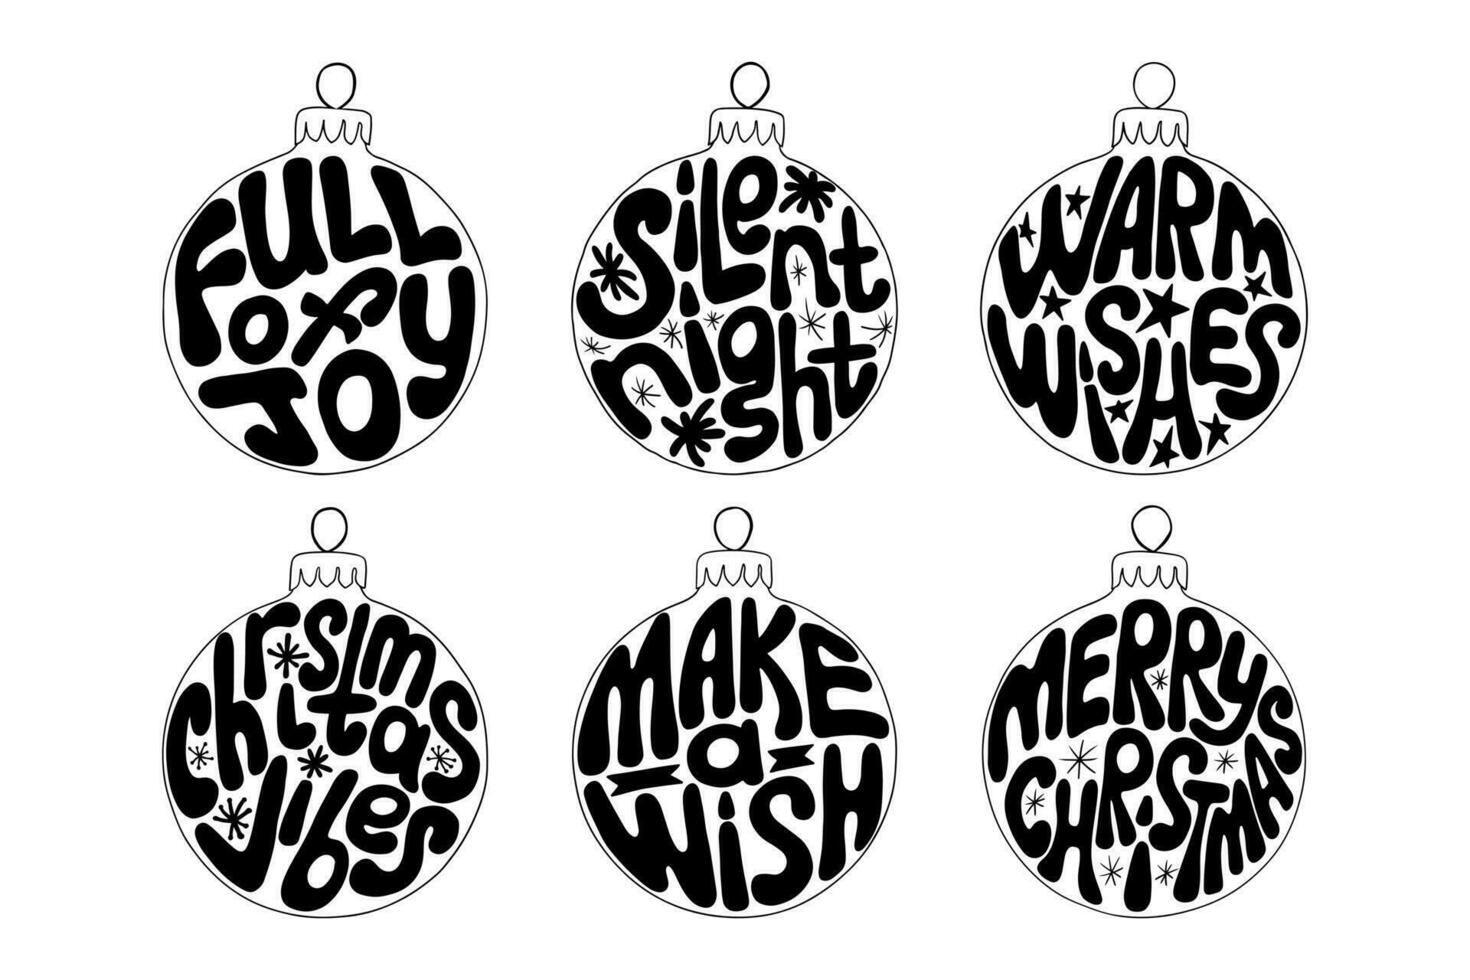 Black and white psychedelic Christmas lettering in christmas balls. Typographic vintage hippie compositions for printout, stickers, holiday decoration. Winter holiday slogans in retro hand drawn style vector